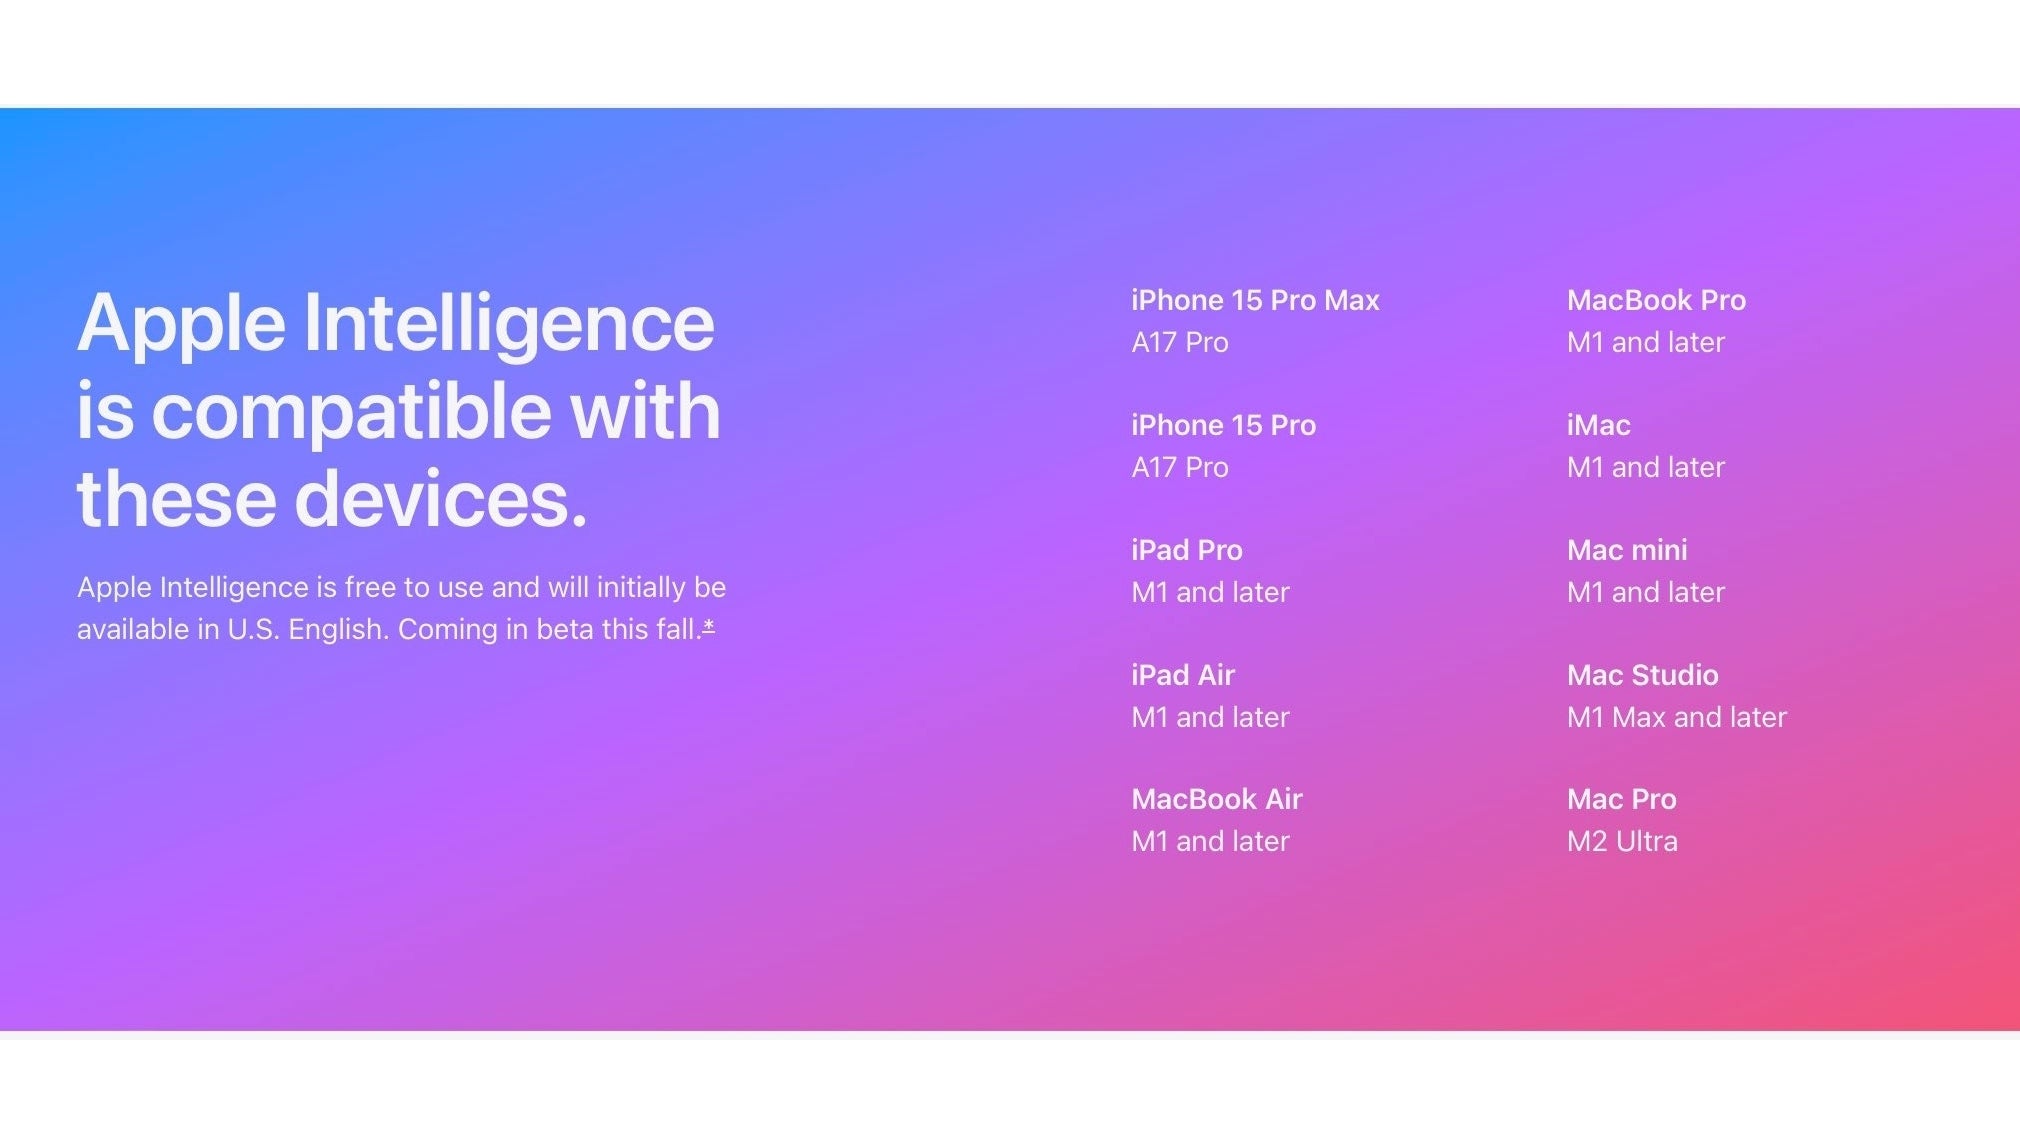 “New Apple Intelligence in iOS 18 will only be available on 50% of the latest flagship iPhones.” Sounds crazy when you put it that way. - Apple has no excuses as iOS 18 disappoints millions: No AI unless you buy a $1,000 iPhone 15 Pro